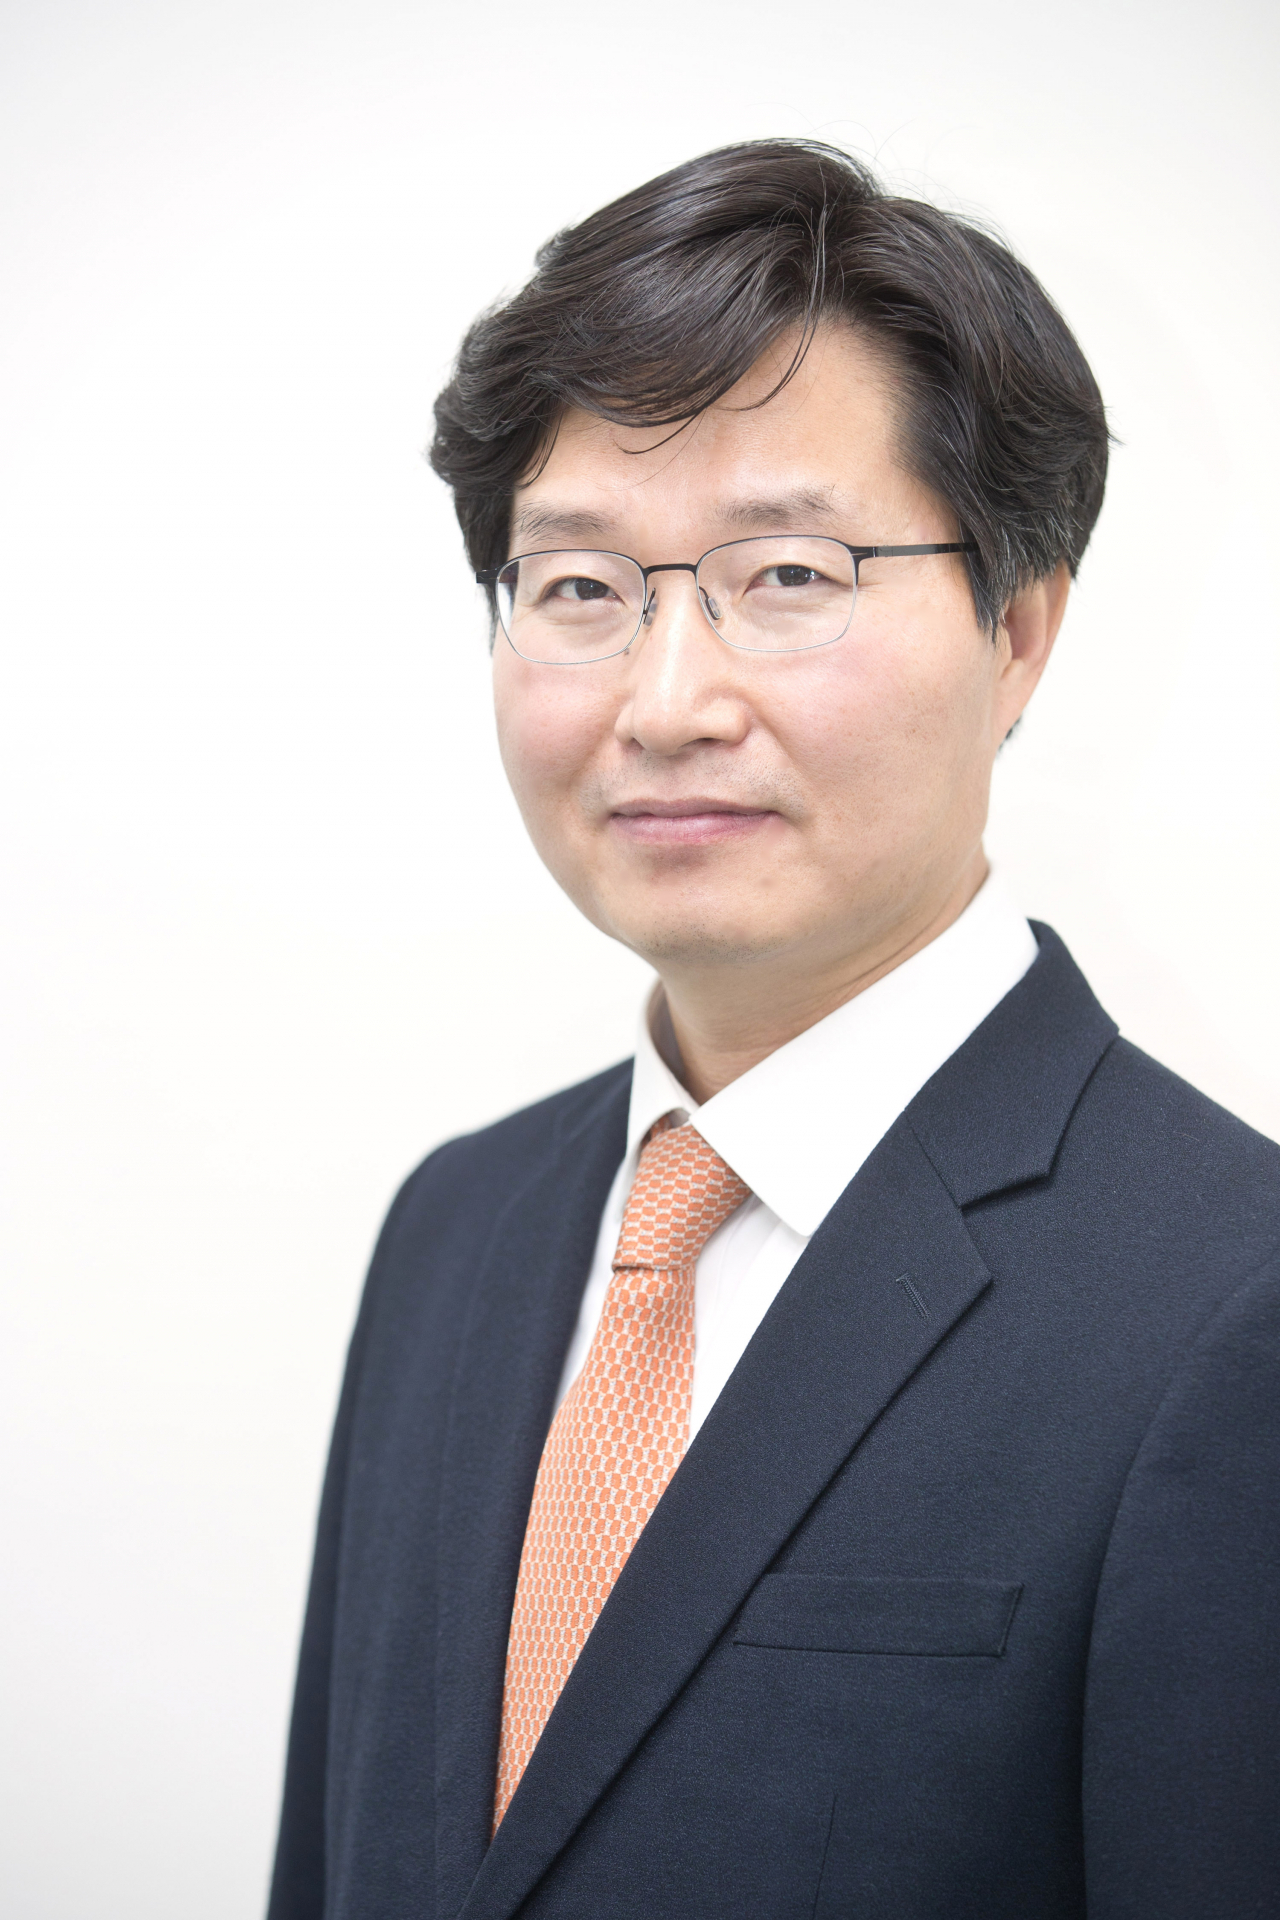 Koo Hyuk-chae, director-general of R&D policy bureau at the Ministry of Science and ICT (Ministry of Science and ICT)